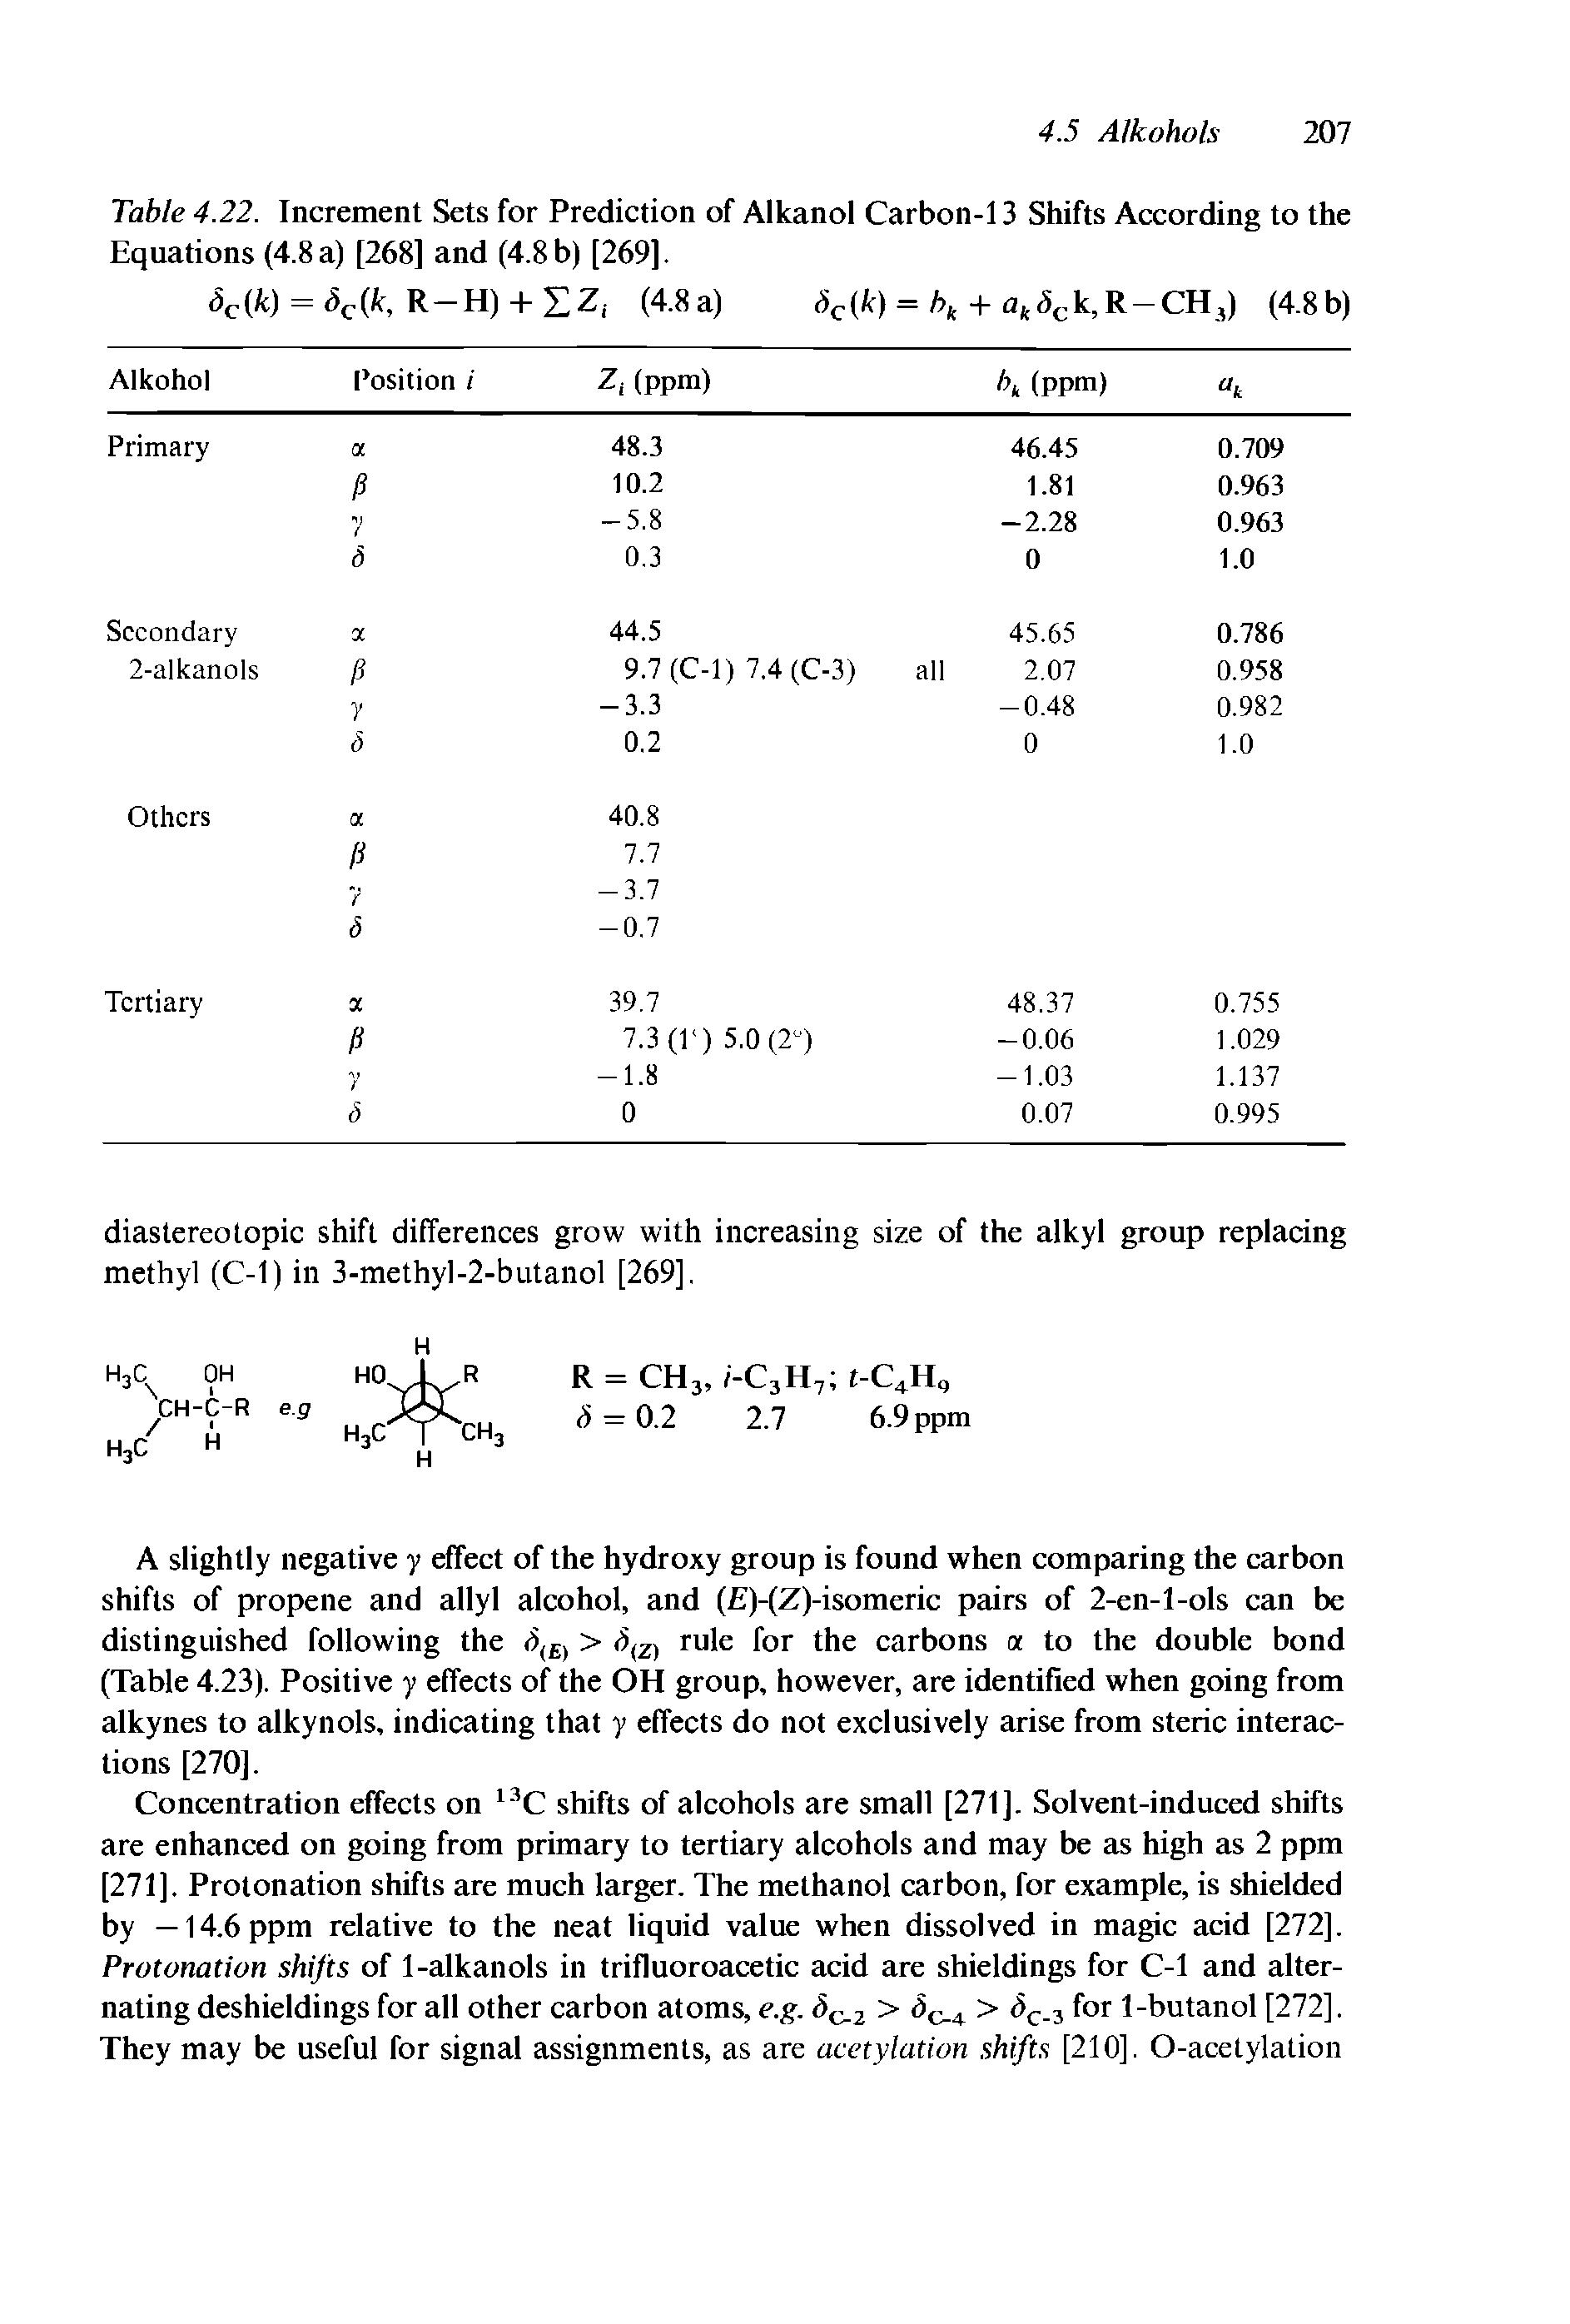 Table 4.22. Increment Sets for Prediction of Alkanol Carbon-13 Shifts According to the Equations (4.8 a) [268] and (4.8 b) [269].